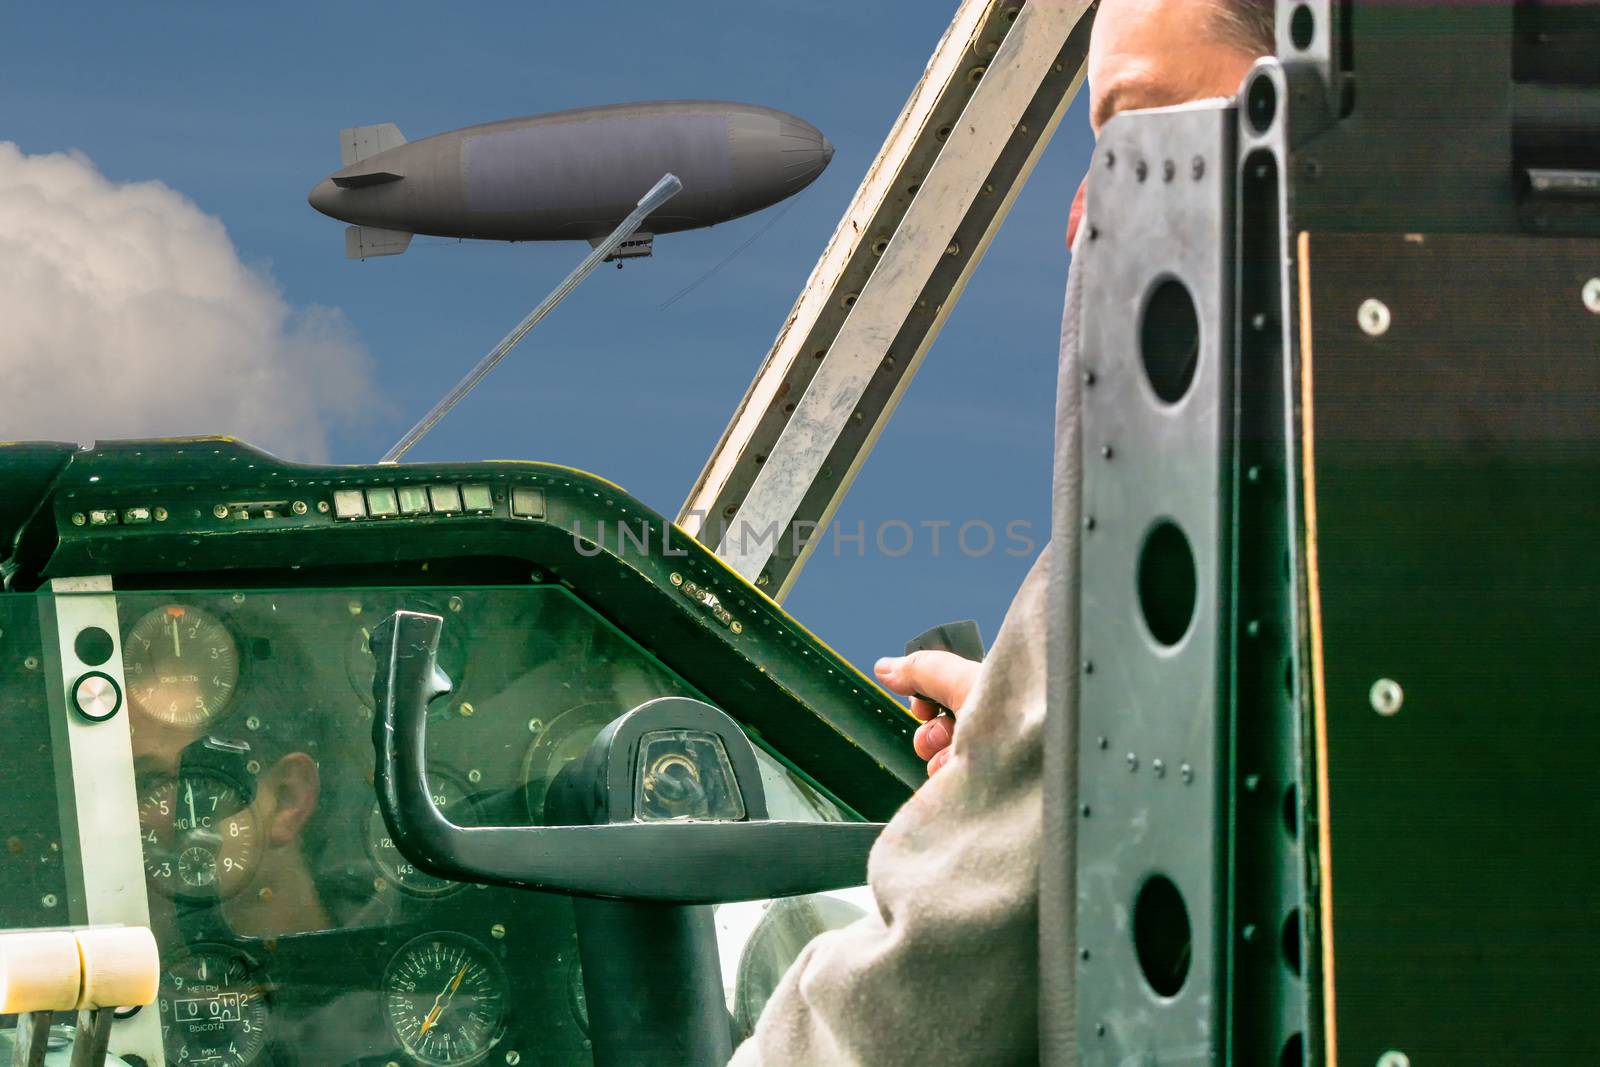 In the cockpit of an old propeller aircraft. Through the cockpit disk you can see a zeppelin passing by.